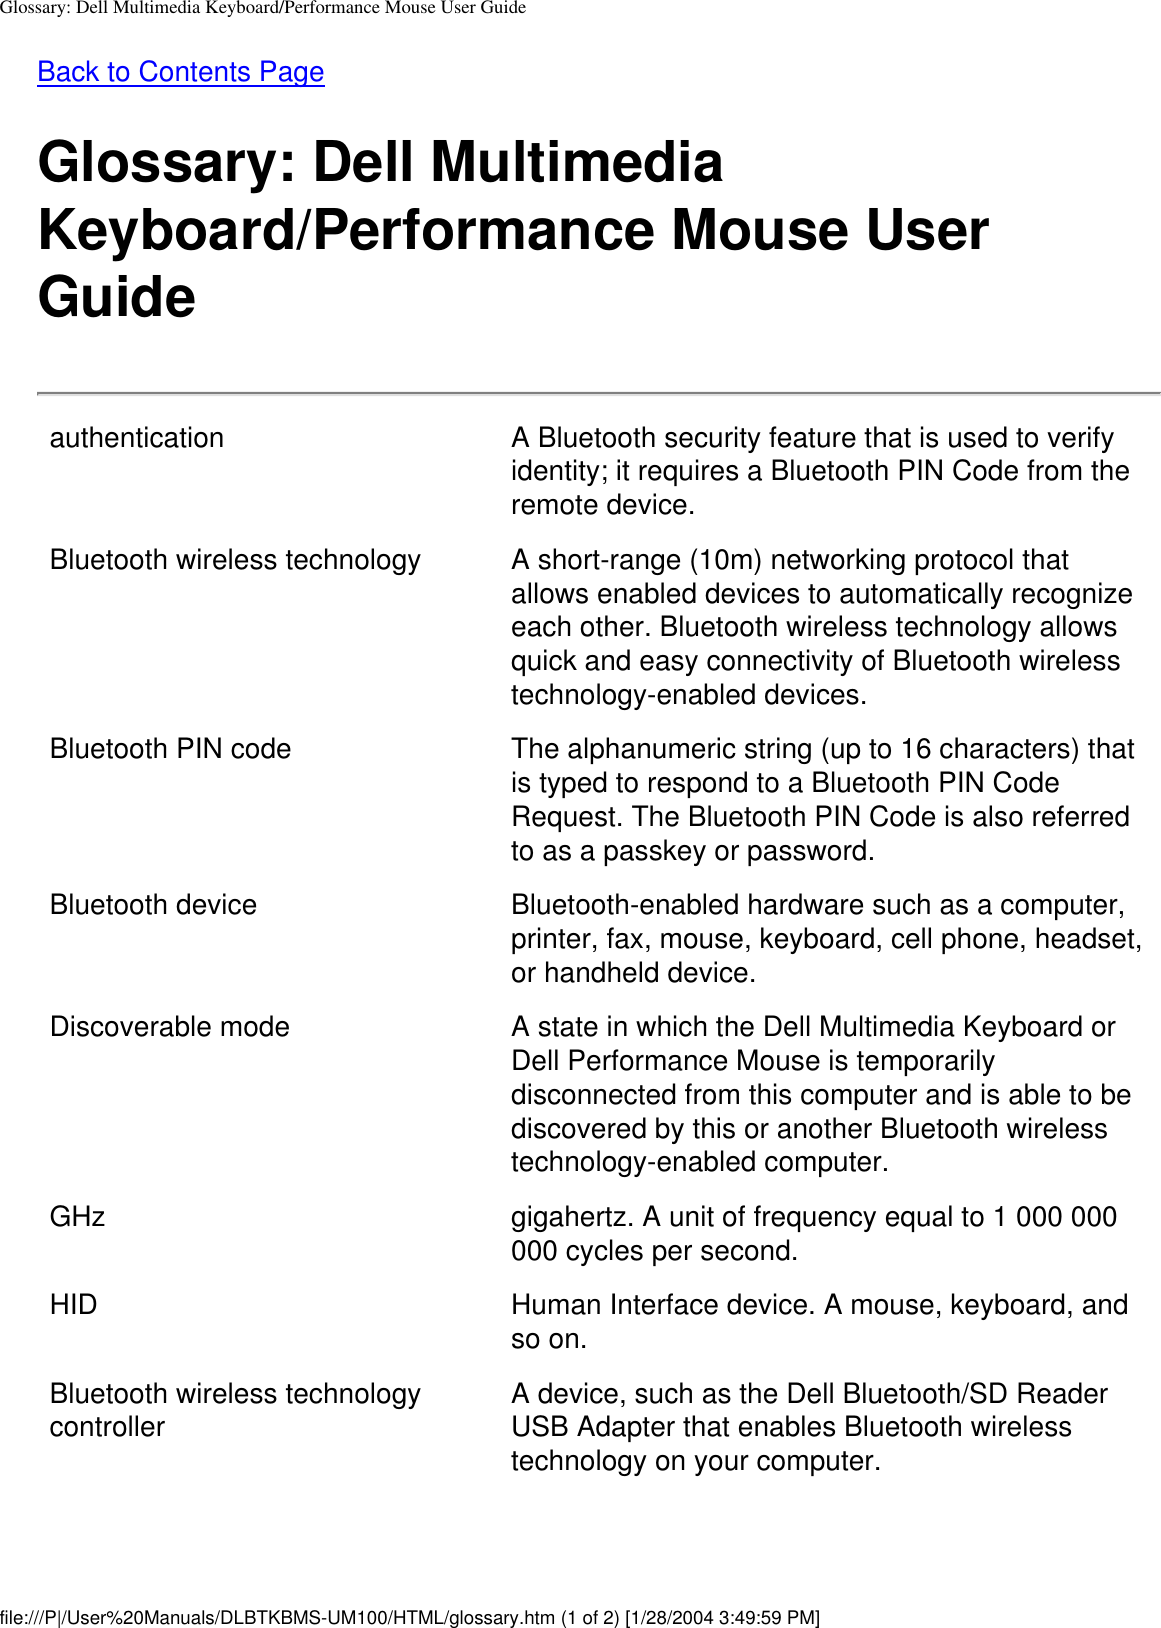 Glossary: Dell Multimedia Keyboard/Performance Mouse User GuideBack to Contents PageGlossary: Dell Multimedia Keyboard/Performance Mouse User Guideauthentication A Bluetooth security feature that is used to verify identity; it requires a Bluetooth PIN Code from the remote device.Bluetooth wireless technology A short-range (10m) networking protocol that allows enabled devices to automatically recognize each other. Bluetooth wireless technology allows quick and easy connectivity of Bluetooth wireless technology-enabled devices.Bluetooth PIN code The alphanumeric string (up to 16 characters) that is typed to respond to a Bluetooth PIN Code Request. The Bluetooth PIN Code is also referred to as a passkey or password.Bluetooth device Bluetooth-enabled hardware such as a computer, printer, fax, mouse, keyboard, cell phone, headset, or handheld device.Discoverable mode A state in which the Dell Multimedia Keyboard or Dell Performance Mouse is temporarily disconnected from this computer and is able to be discovered by this or another Bluetooth wireless technology-enabled computer. GHz gigahertz. A unit of frequency equal to 1 000 000 000 cycles per second.HID Human Interface device. A mouse, keyboard, and so on.Bluetooth wireless technology controller  A device, such as the Dell Bluetooth/SD Reader USB Adapter that enables Bluetooth wireless technology on your computer.file:///P|/User%20Manuals/DLBTKBMS-UM100/HTML/glossary.htm (1 of 2) [1/28/2004 3:49:59 PM]